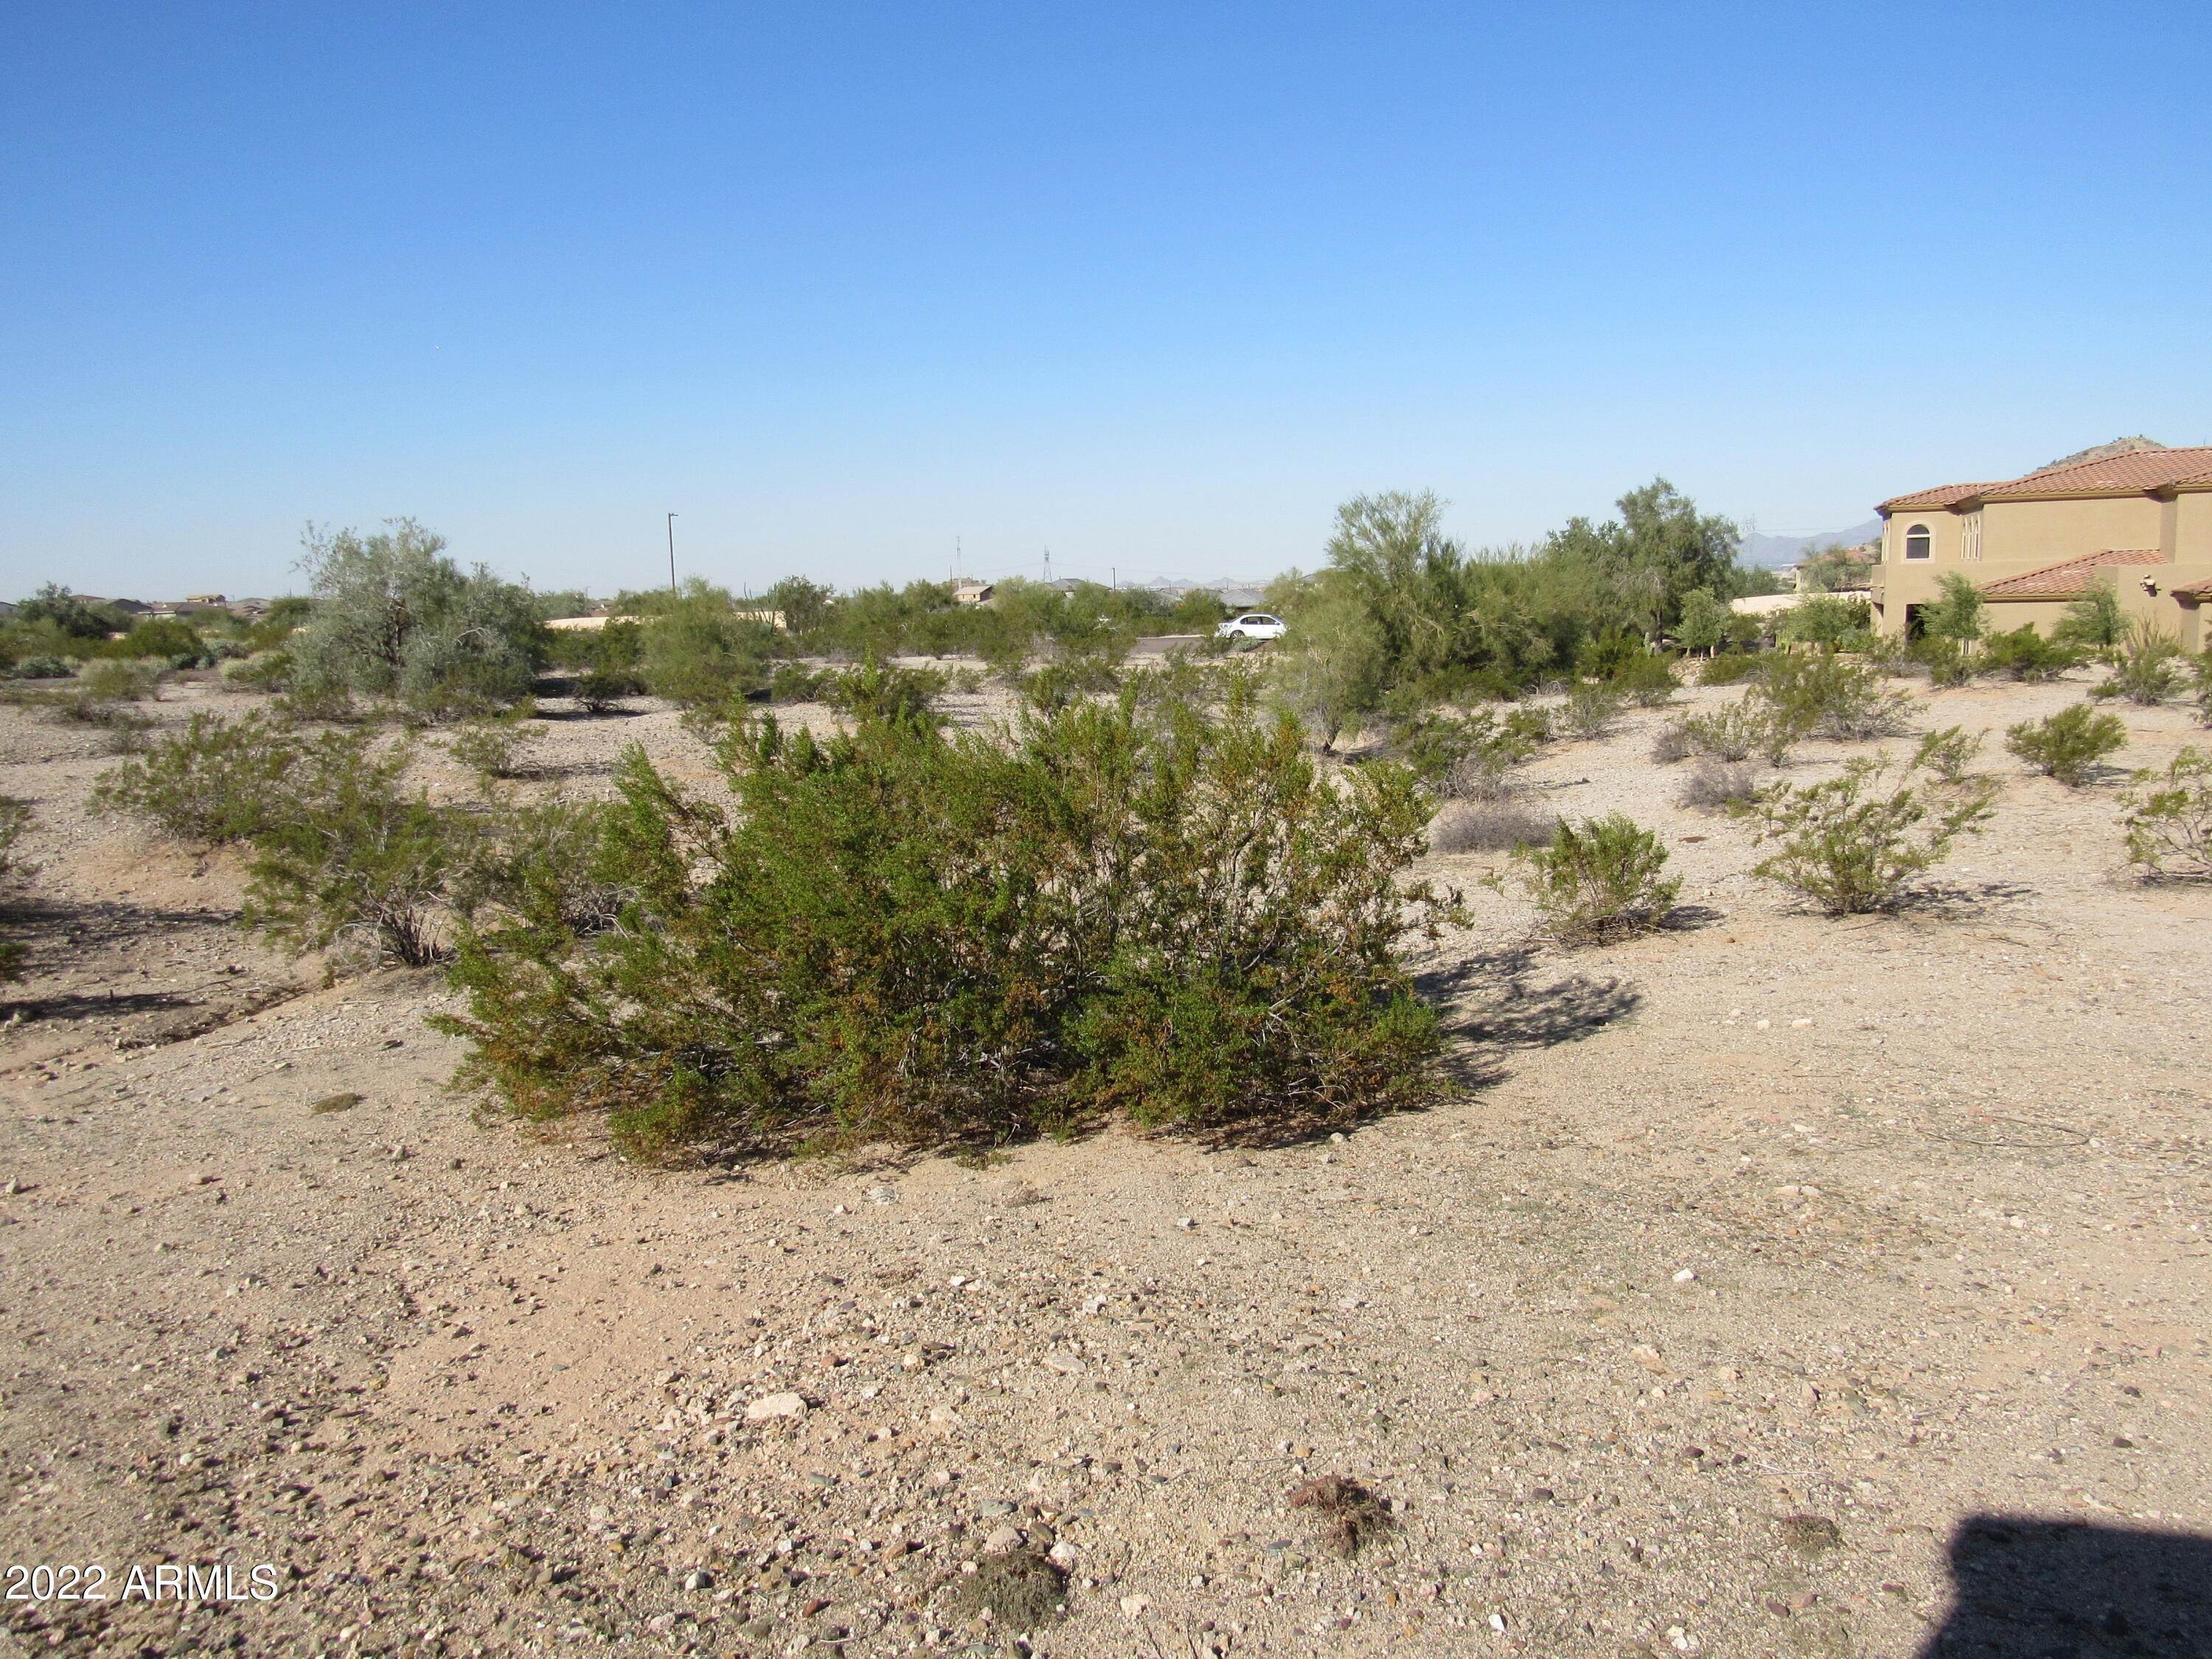 7. Land for Sale at Goodyear, AZ 85338